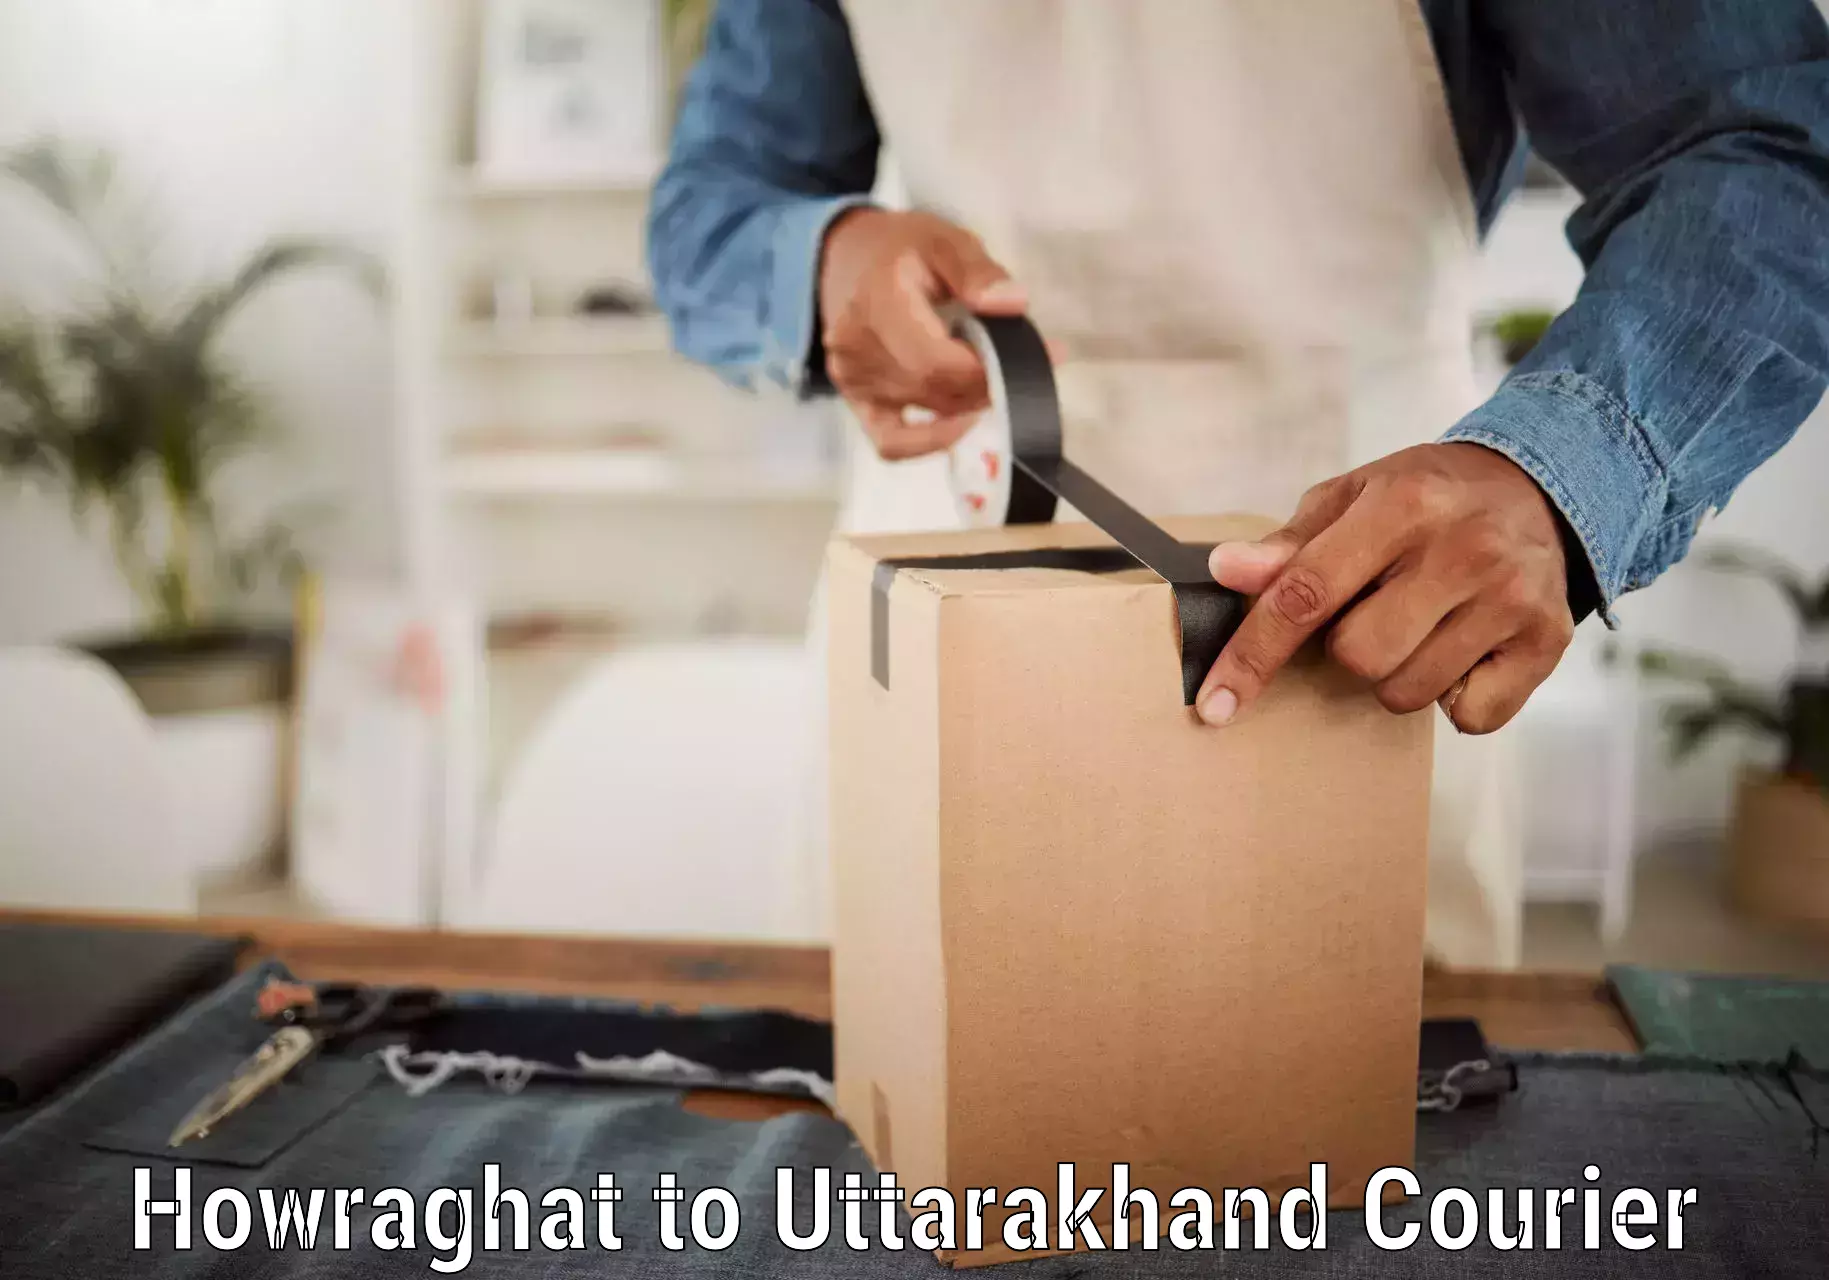 Courier service innovation Howraghat to Bageshwar